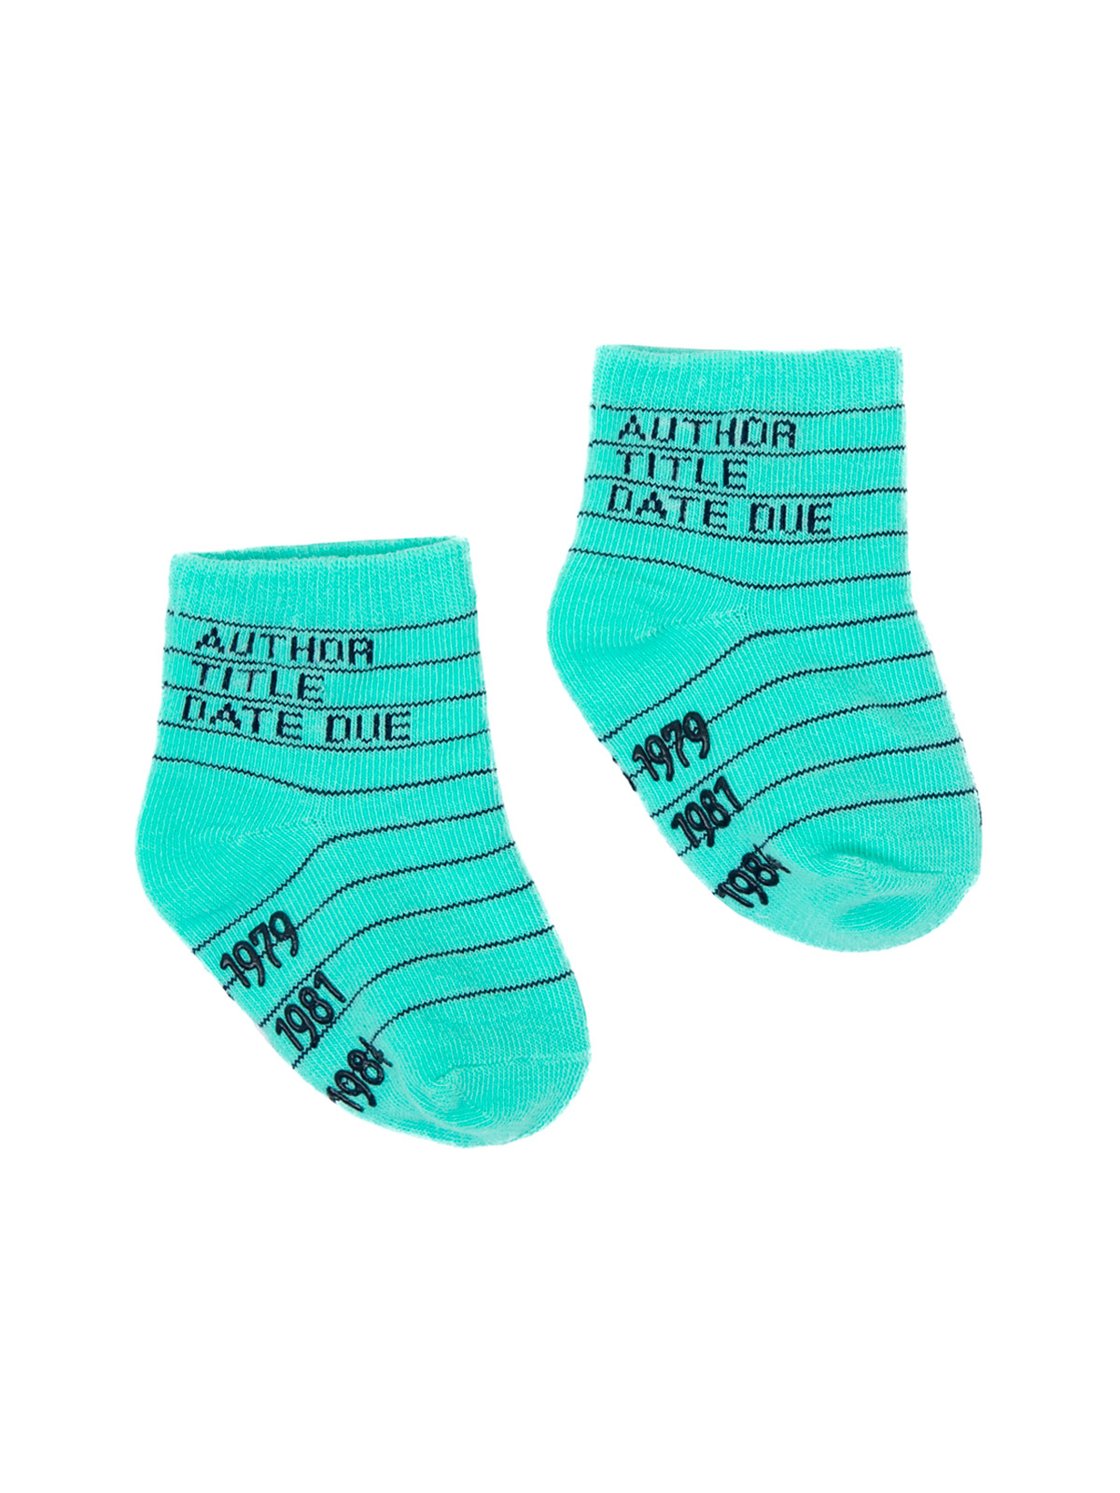 These kid's cotton crew socks in green by the brand Out of Print feature the iconic library card design with the words 